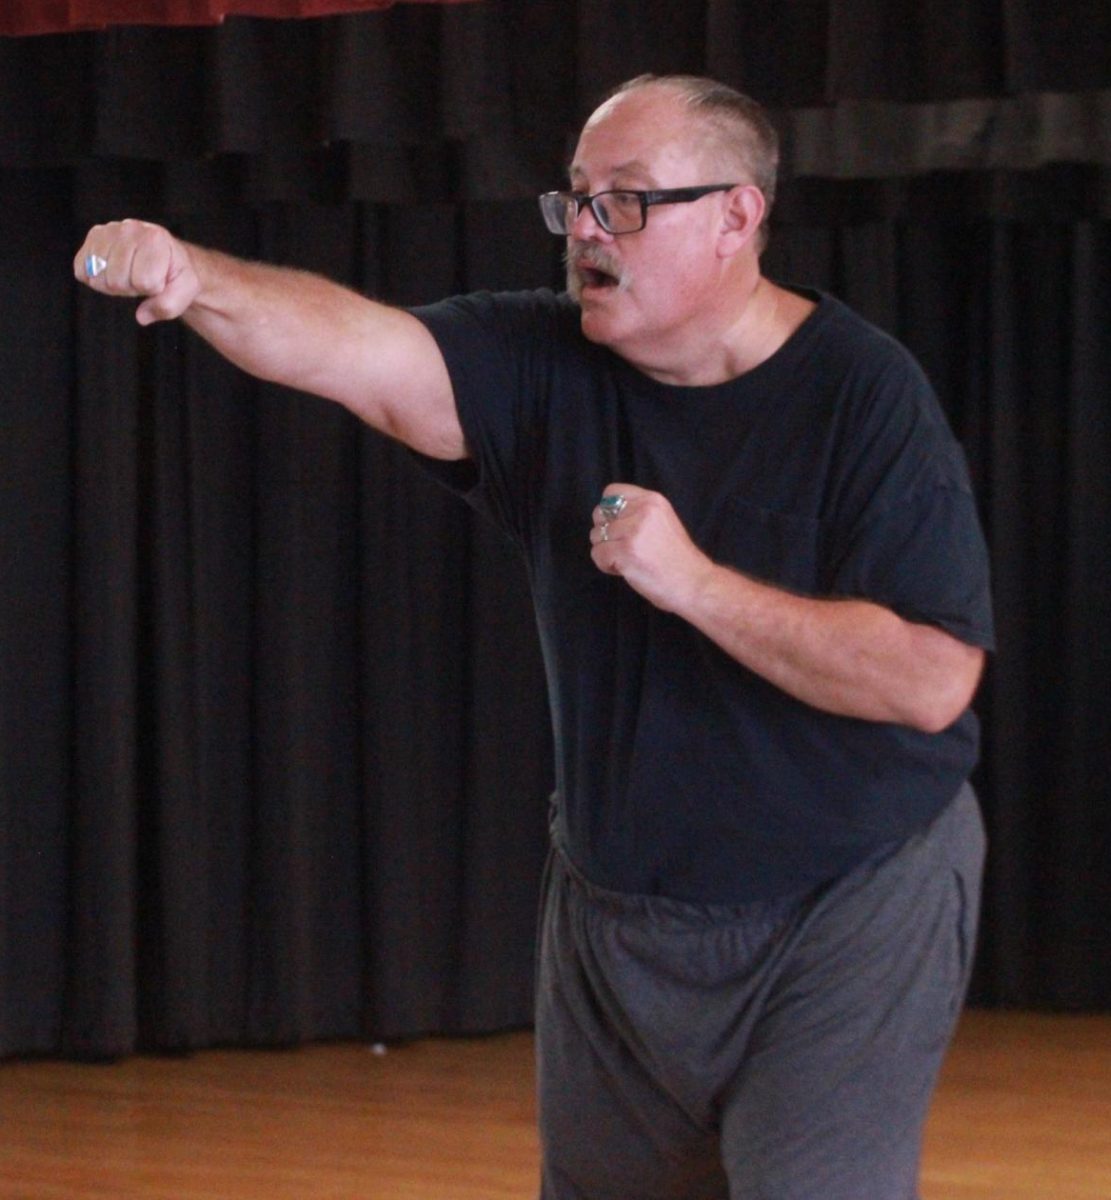 Self-defense training  educates students, faculty